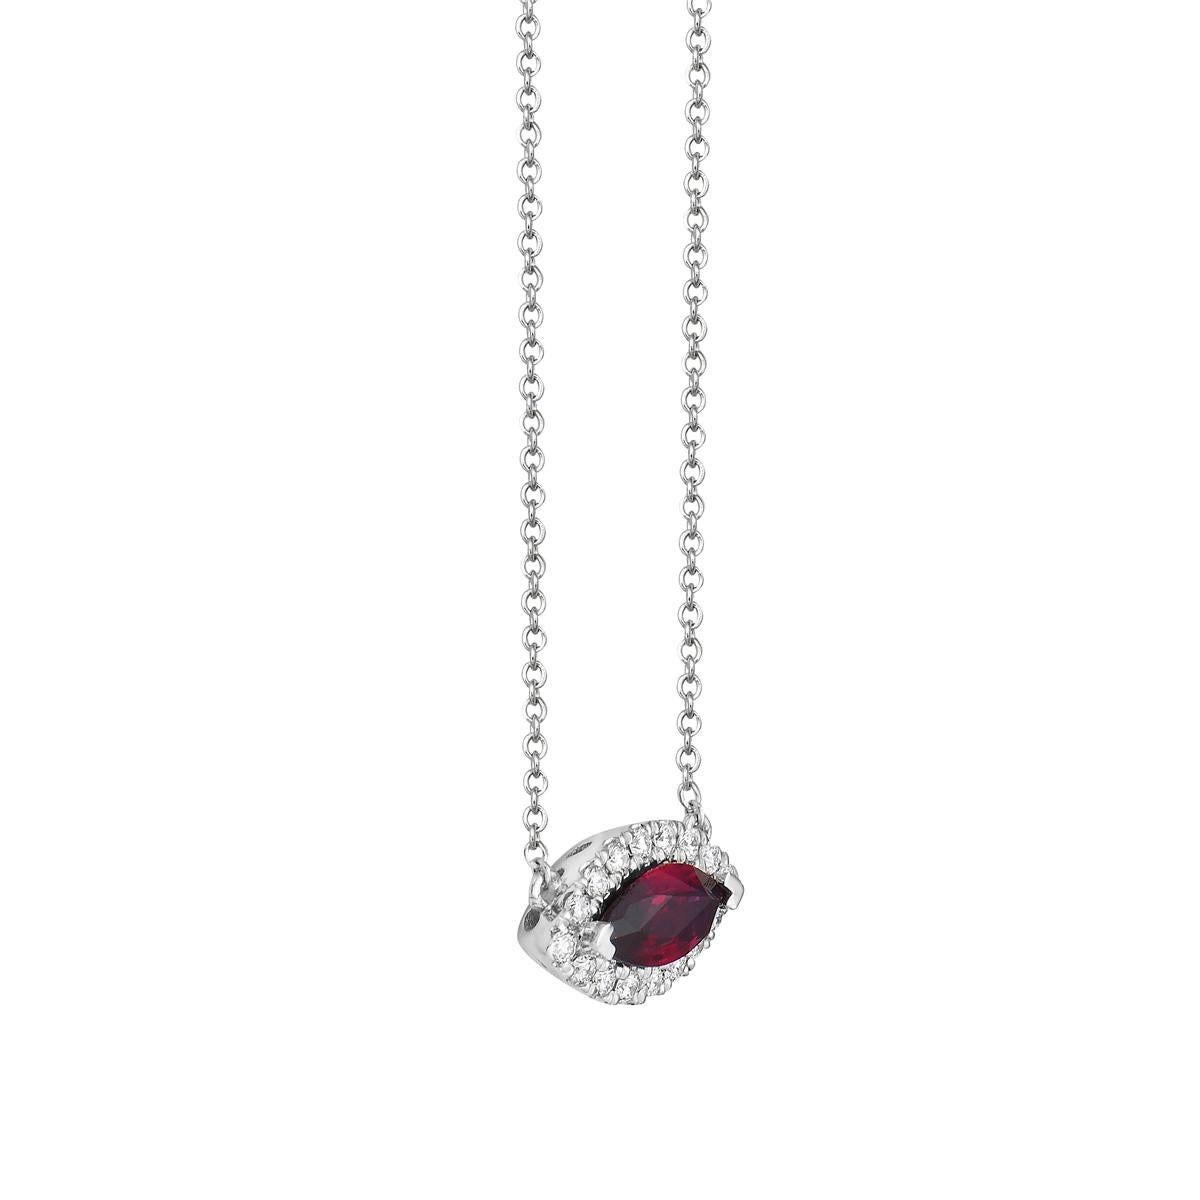 With this exquisite marquise-shaped ruby and diamond necklace, style and glamour are in the spotlight. This 18-karat diamond and ruby necklace is made from 0.9 grams of gold. This necklace is adorned with VS2, G color diamonds, made out of 16